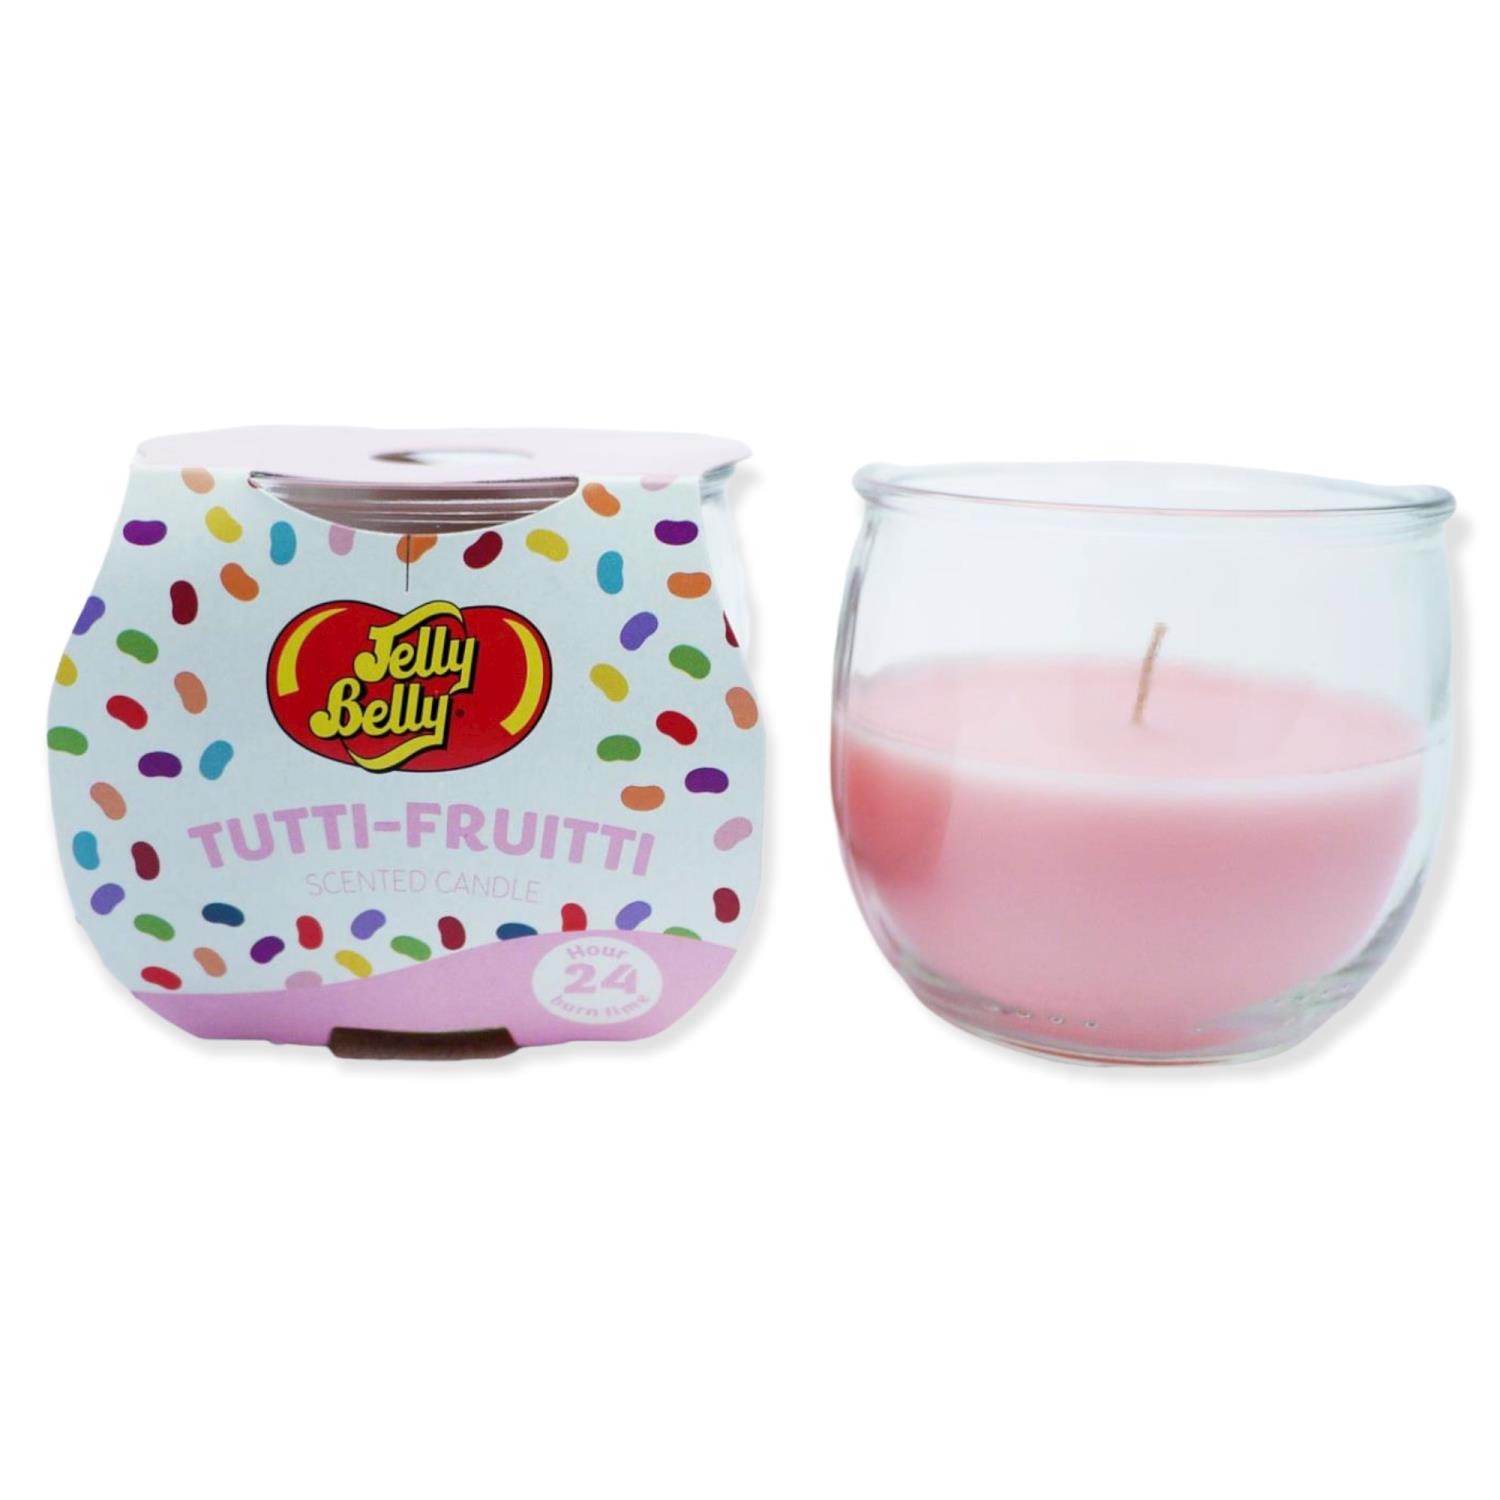 Jelly Belly Tutti Frutti Candle 85g